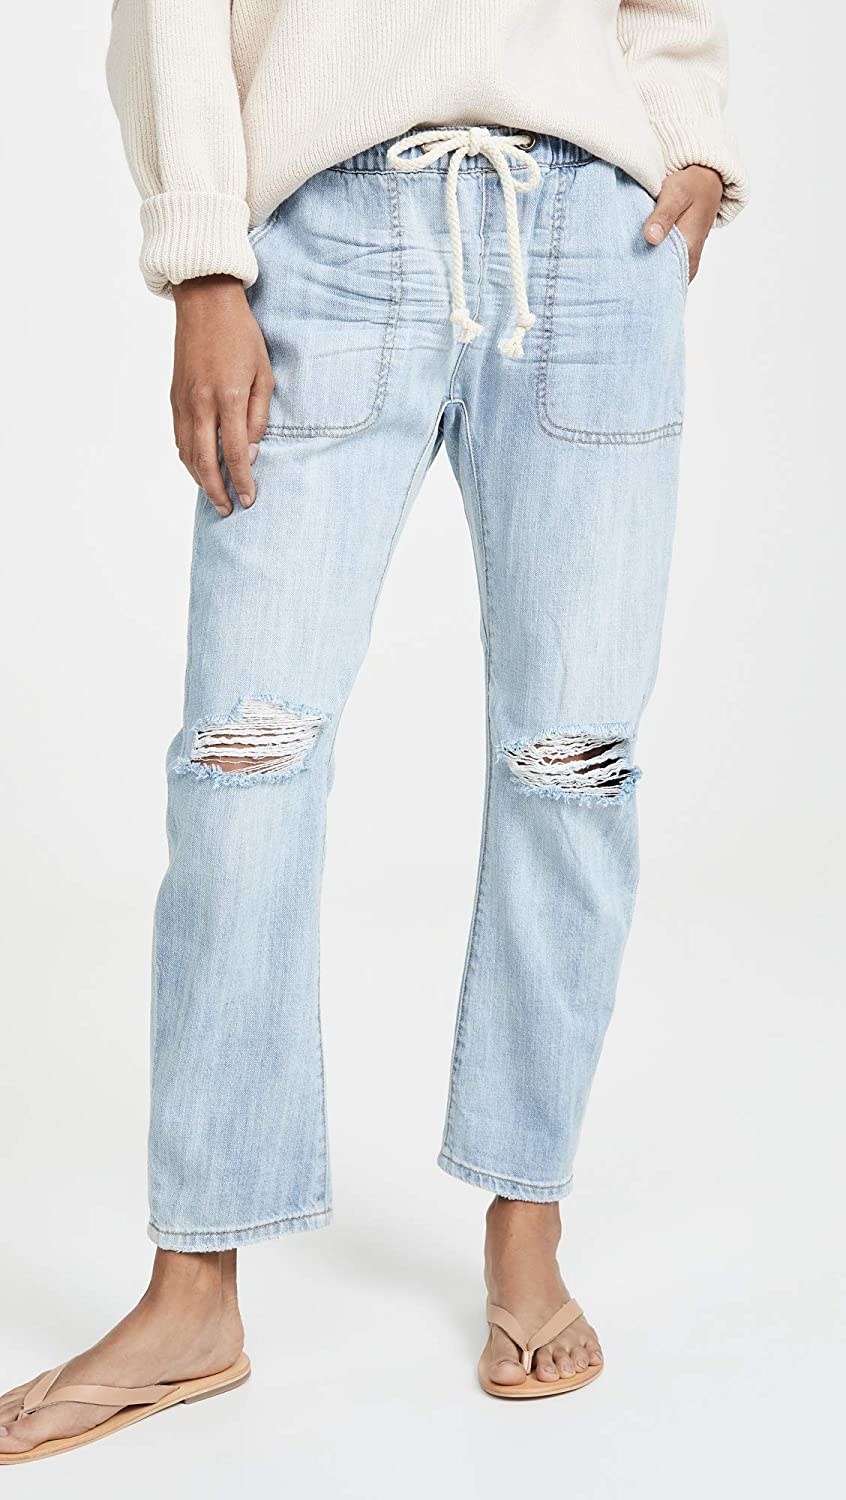 Model wearing the ripped light wash jeans with large front pockets